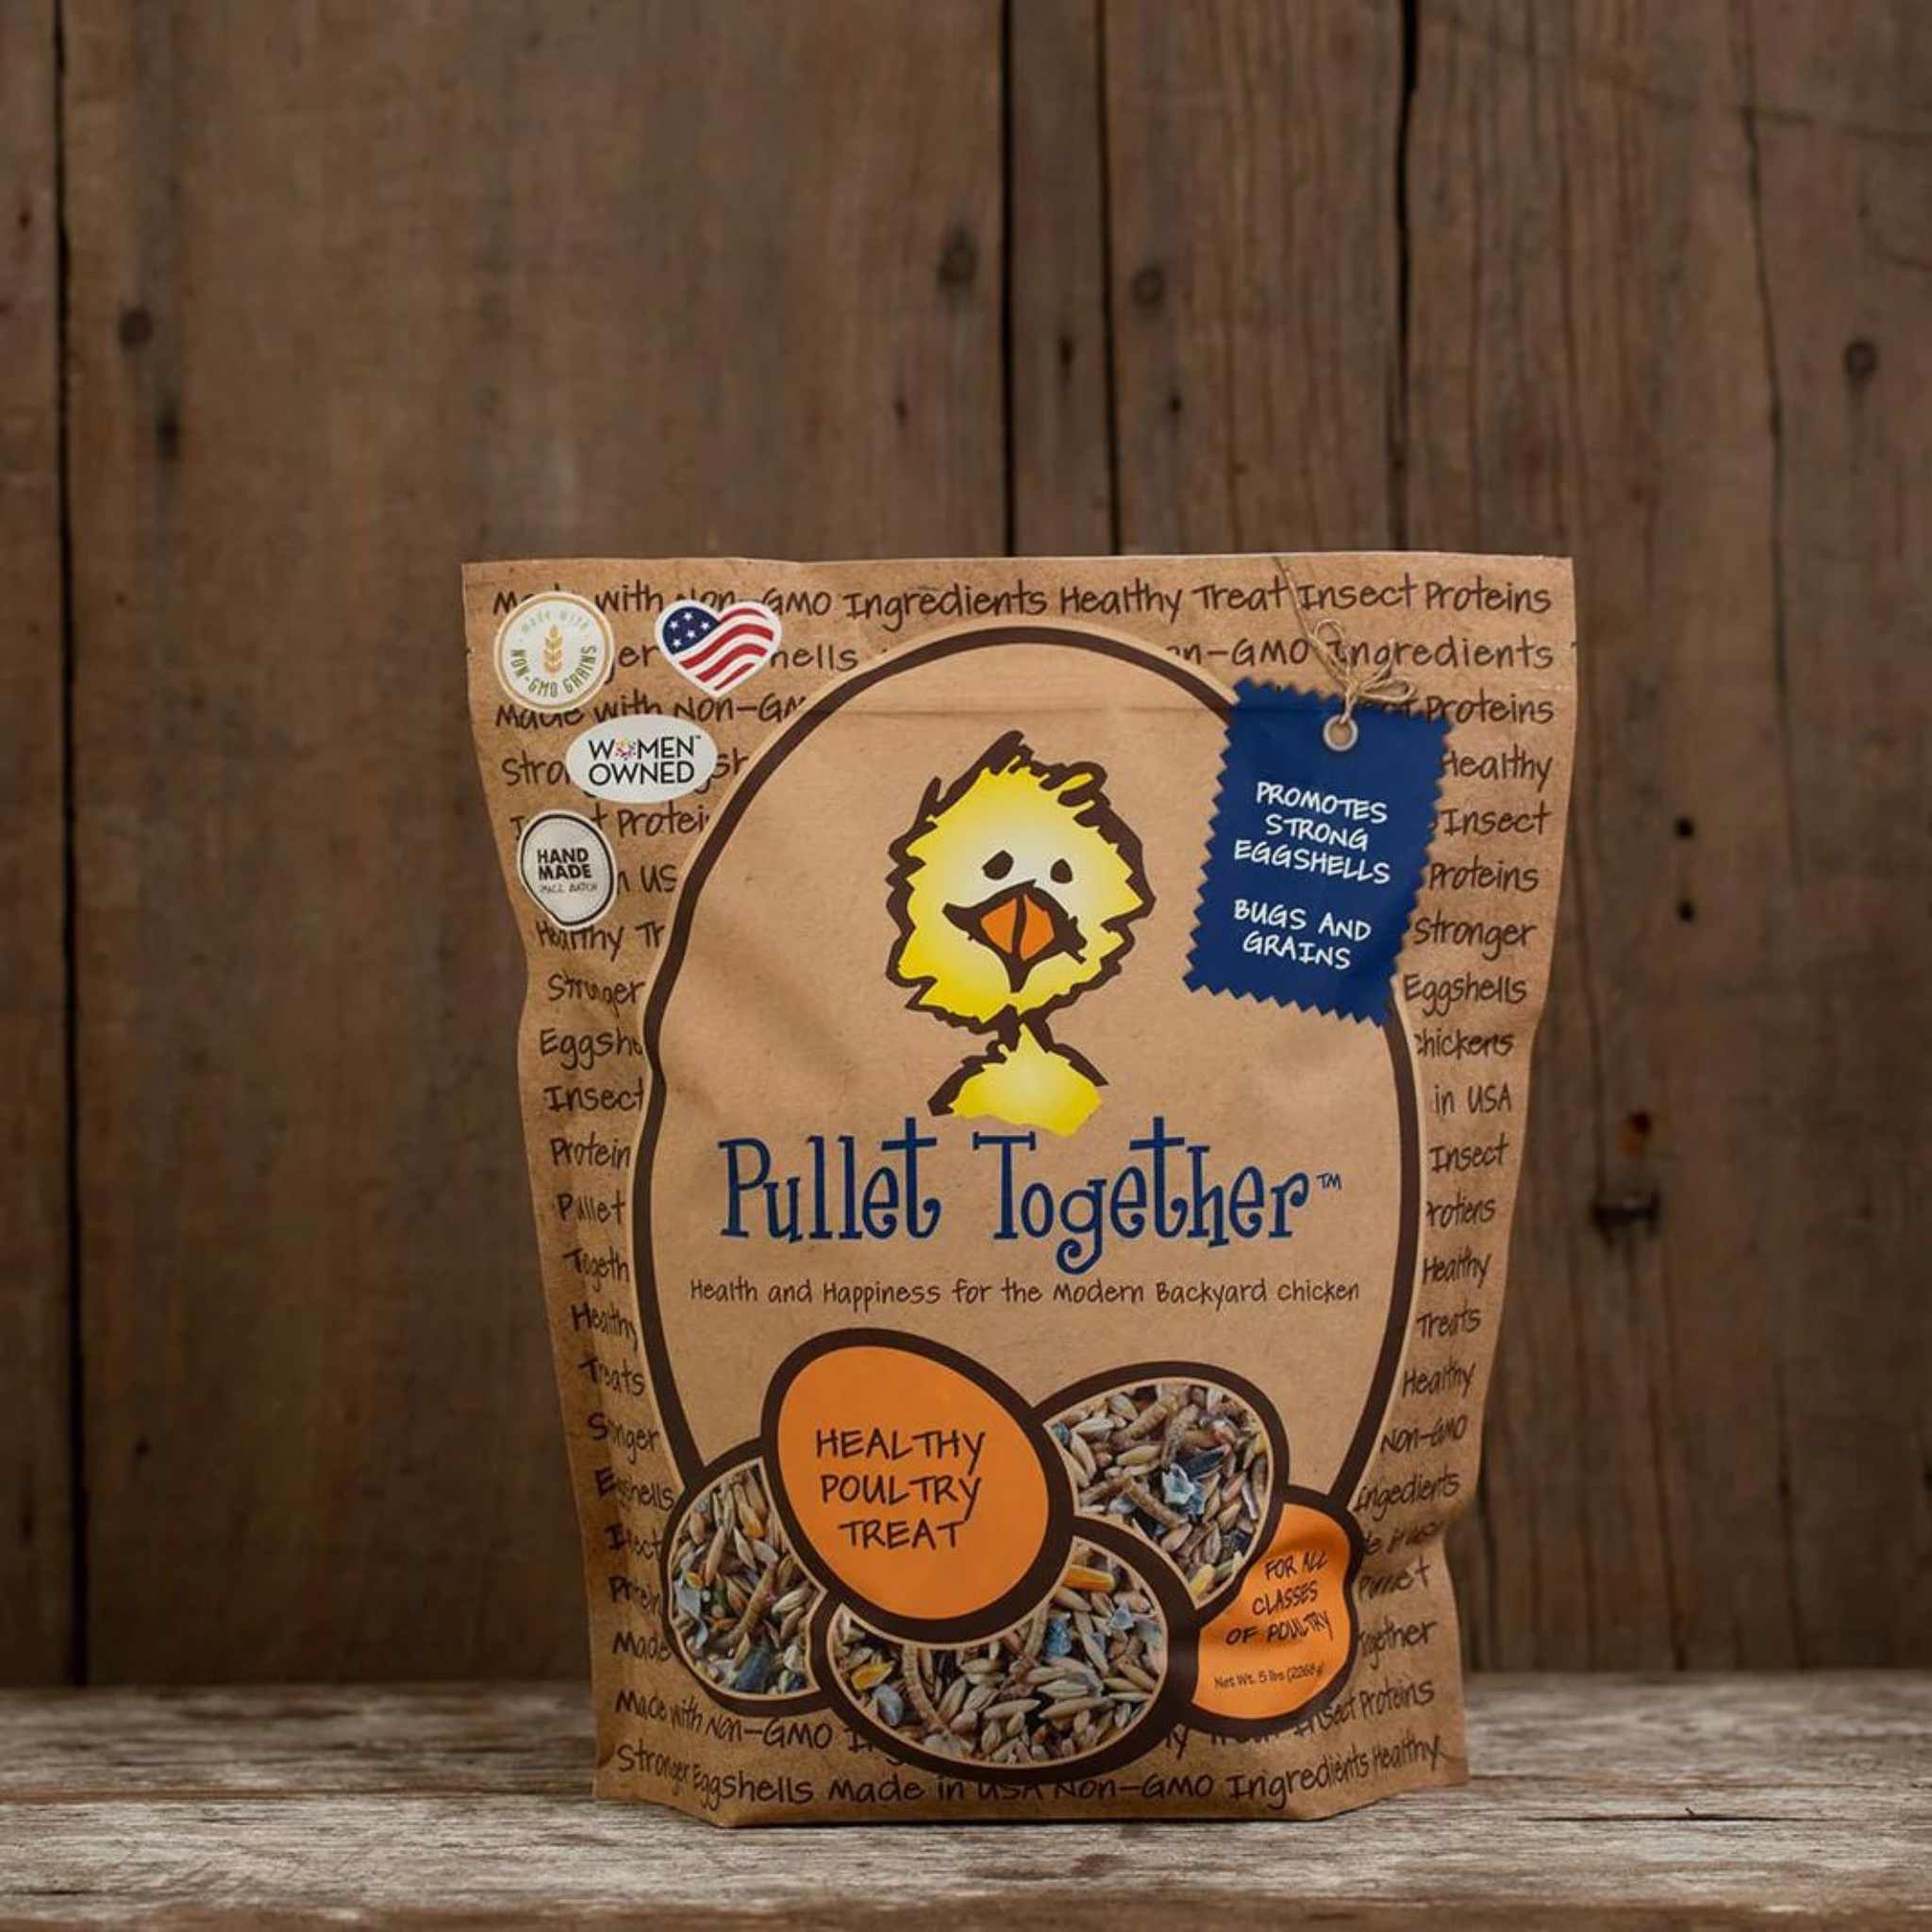 Hatching Time Treats for Chickens. Pullet together healthy poultry treat can be seen on table. Women owned pullet treats. Promotes strong eggshells. Bag states snacks contain bugs and grains. 